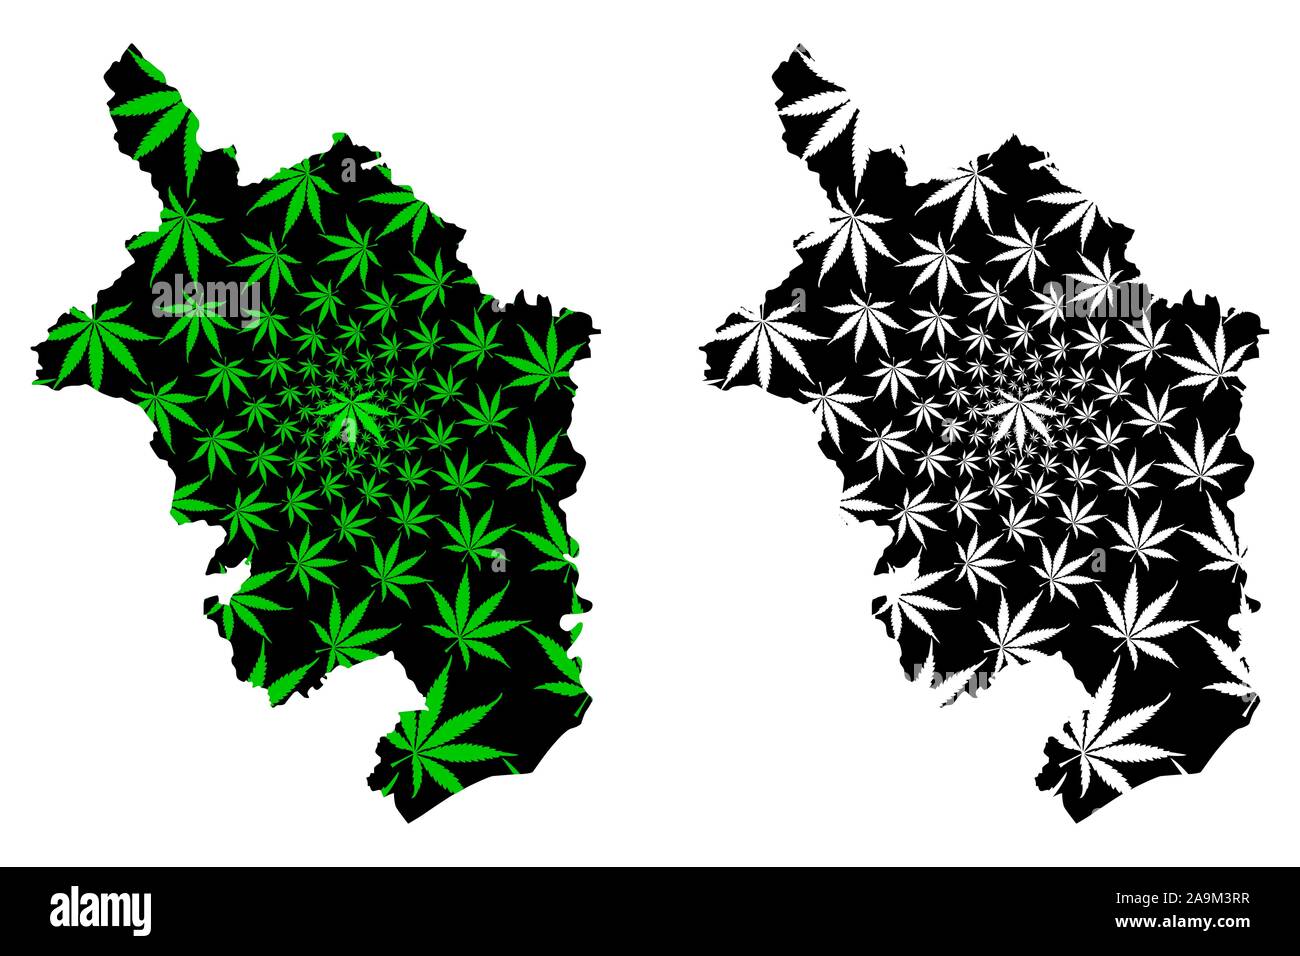 Monmouthshire (United Kingdom, Wales, Cymru, Principal areas of Wales) map is designed cannabis leaf green and black, County of Monmouthshire map made Stock Vector